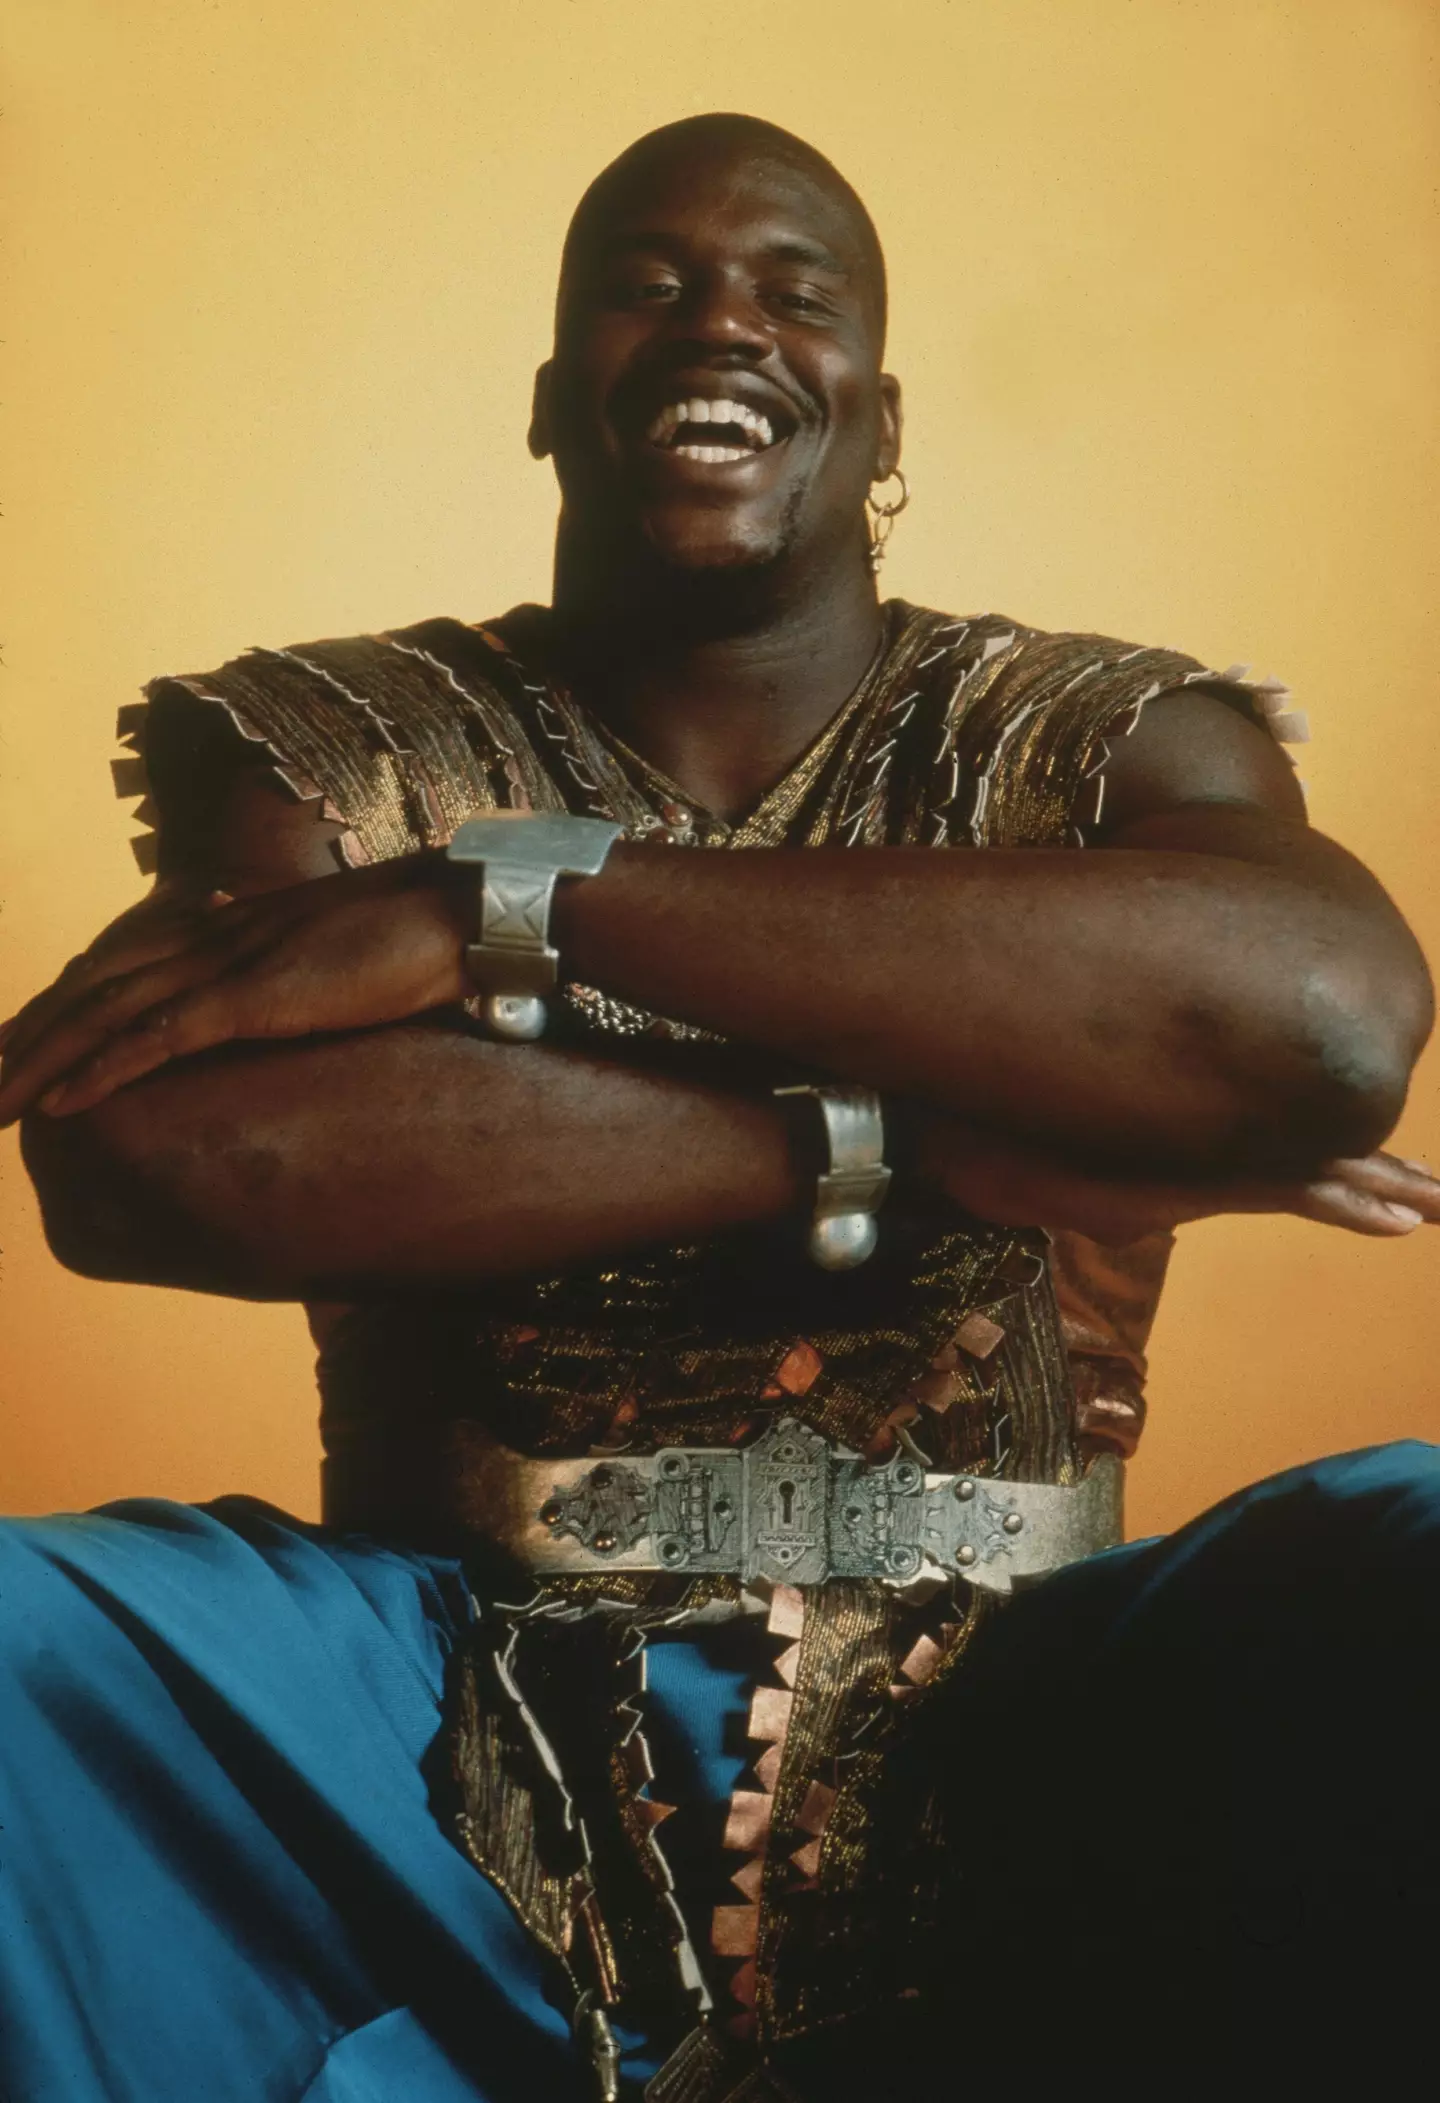 Kazaam was a box office flop and panned by critics.